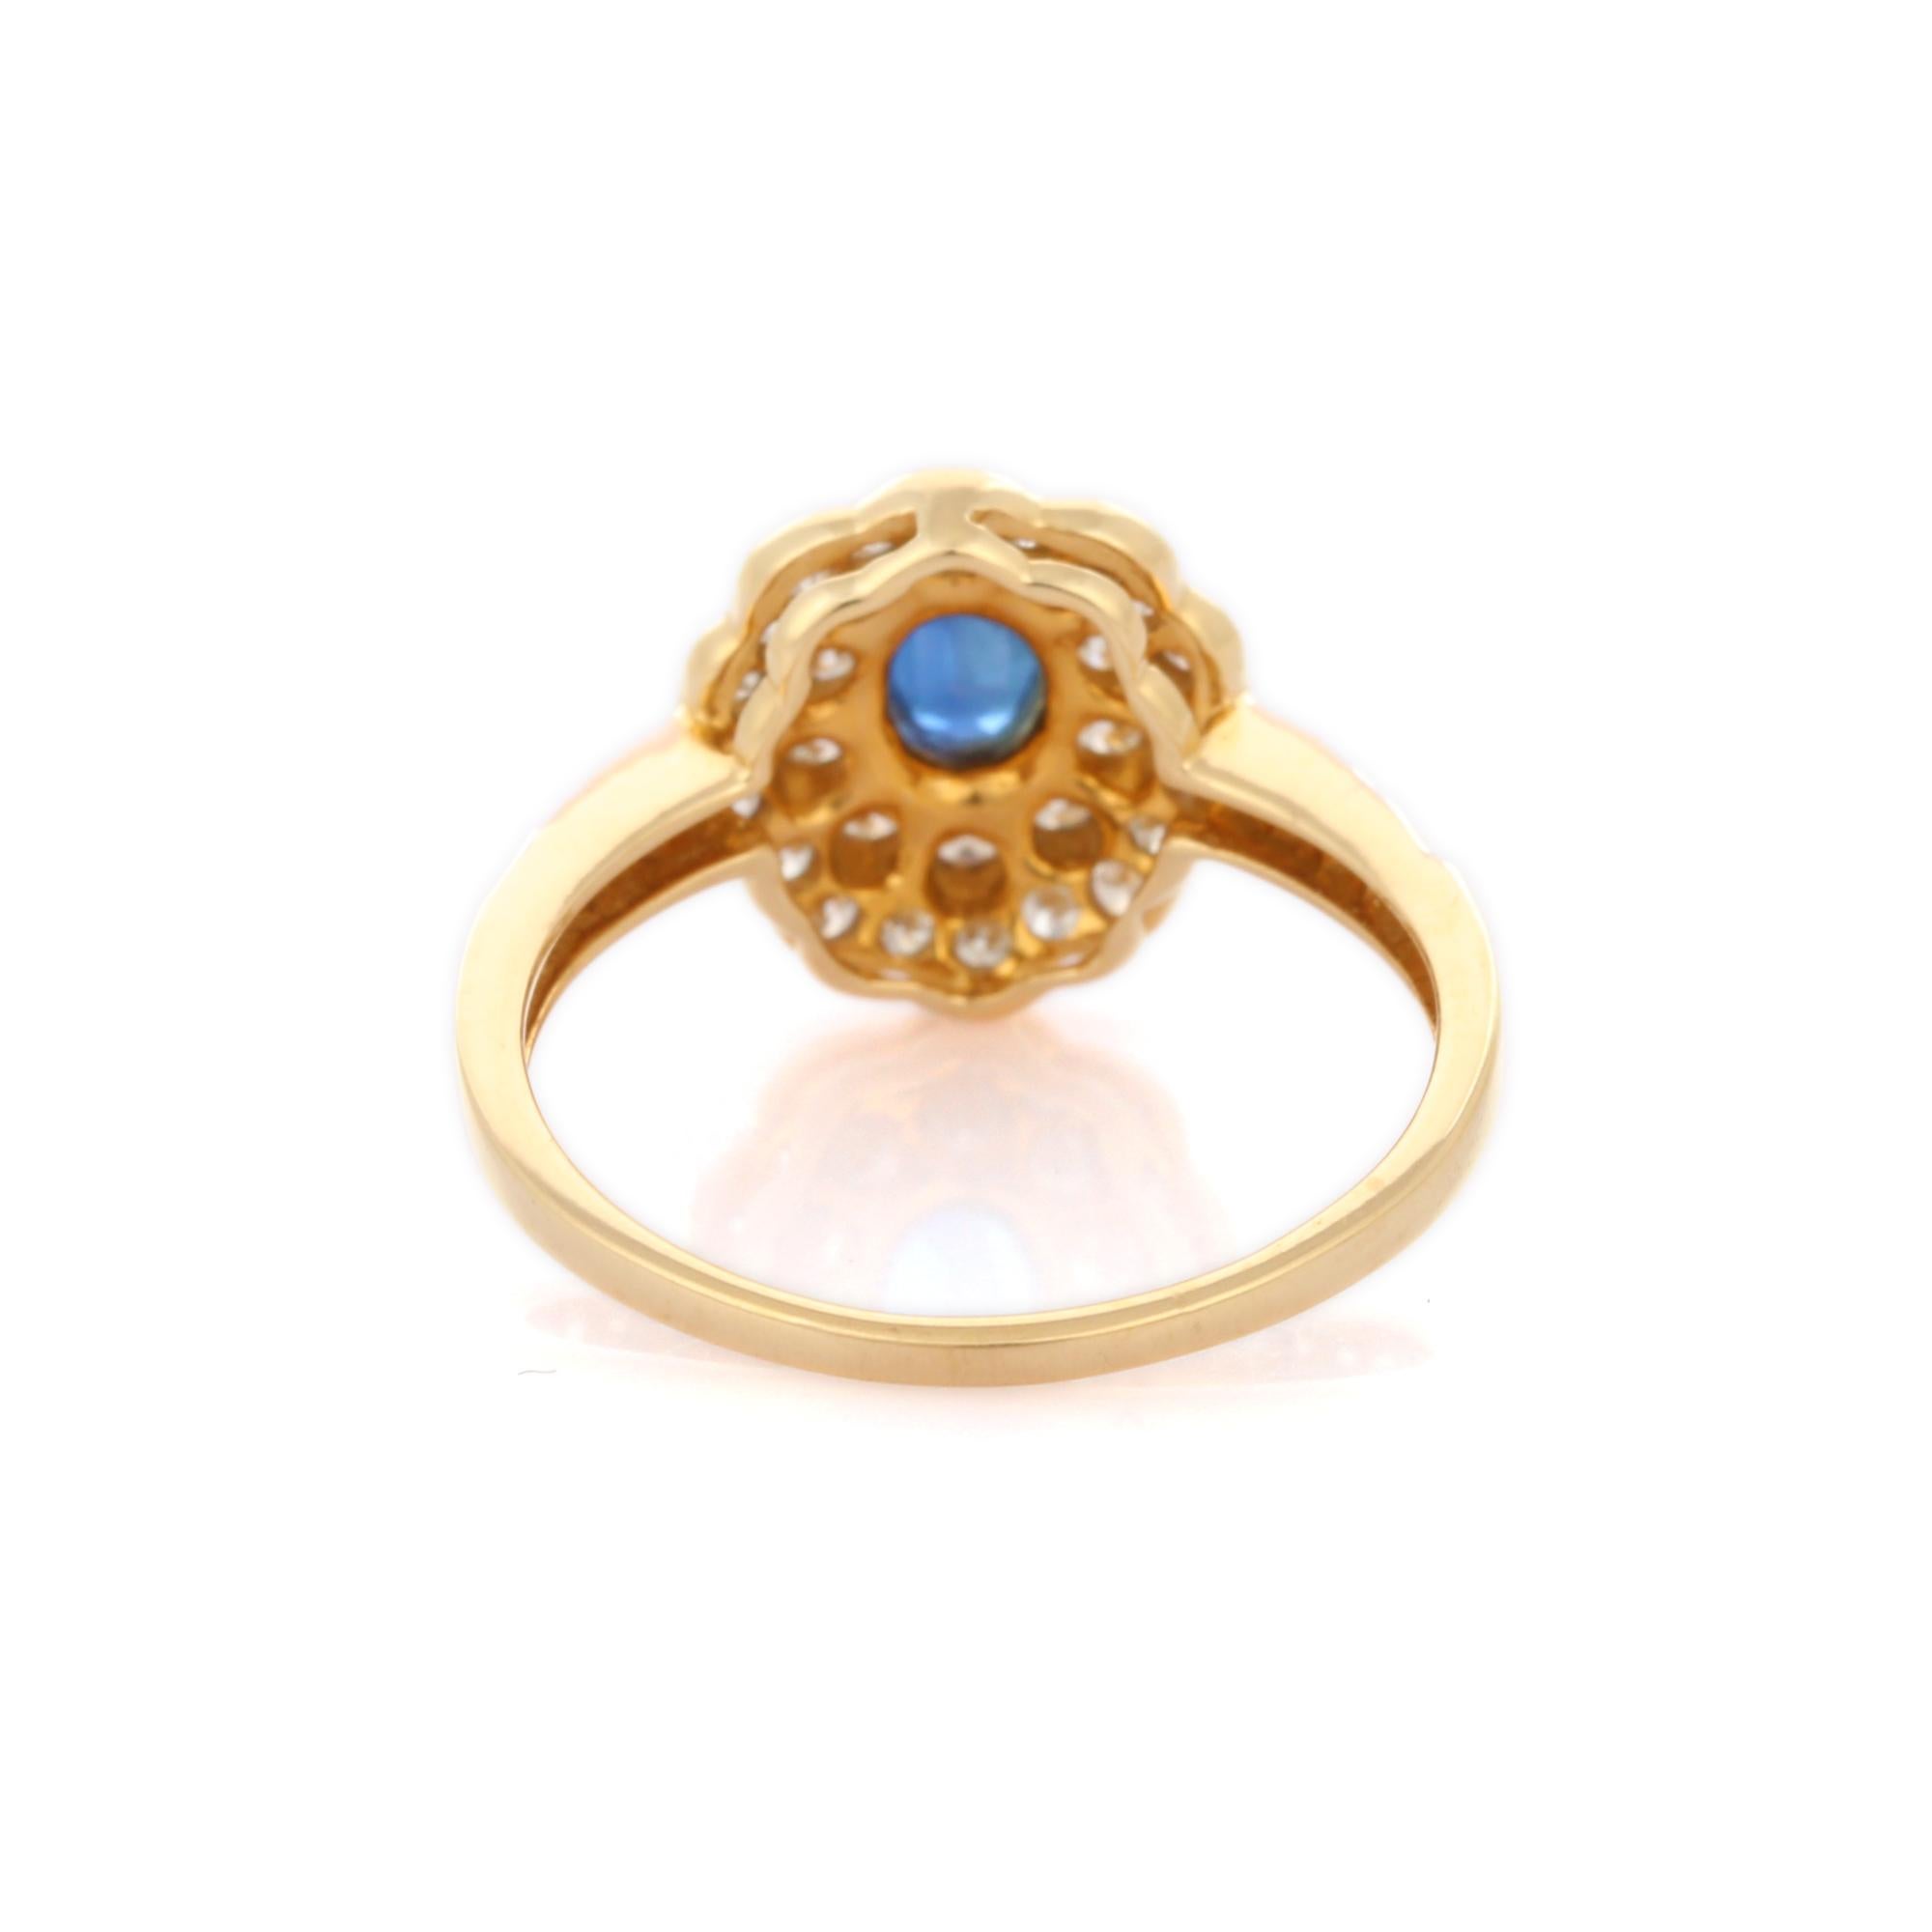 For Sale:  Big Floral Blue Sapphire Cocktail Ring with Inlaid Diamonds in 18K Yellow Gold 4